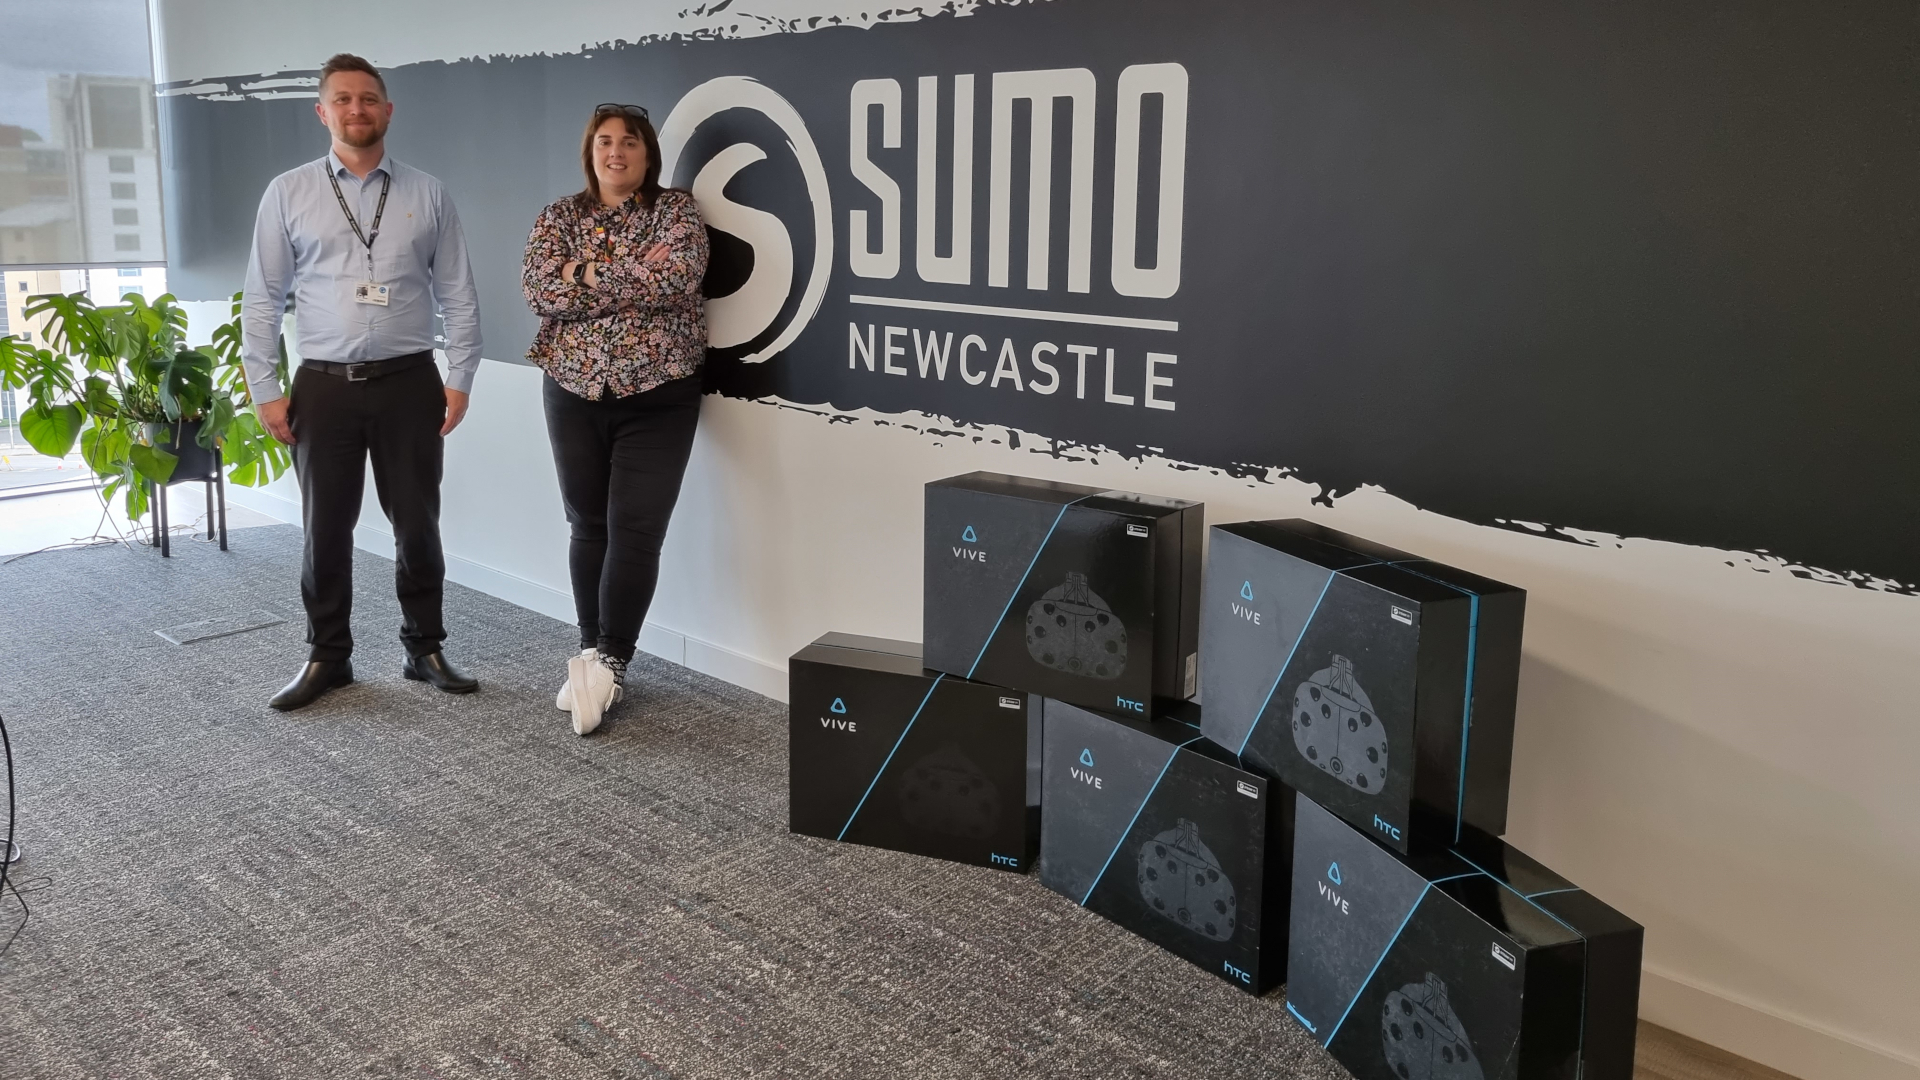 From L-R: Phil O'Neil, Head of Digital Technology &amp; Business at Gateshead College; and Jemma Harris, Executive Producer at Sumo Newcastle.